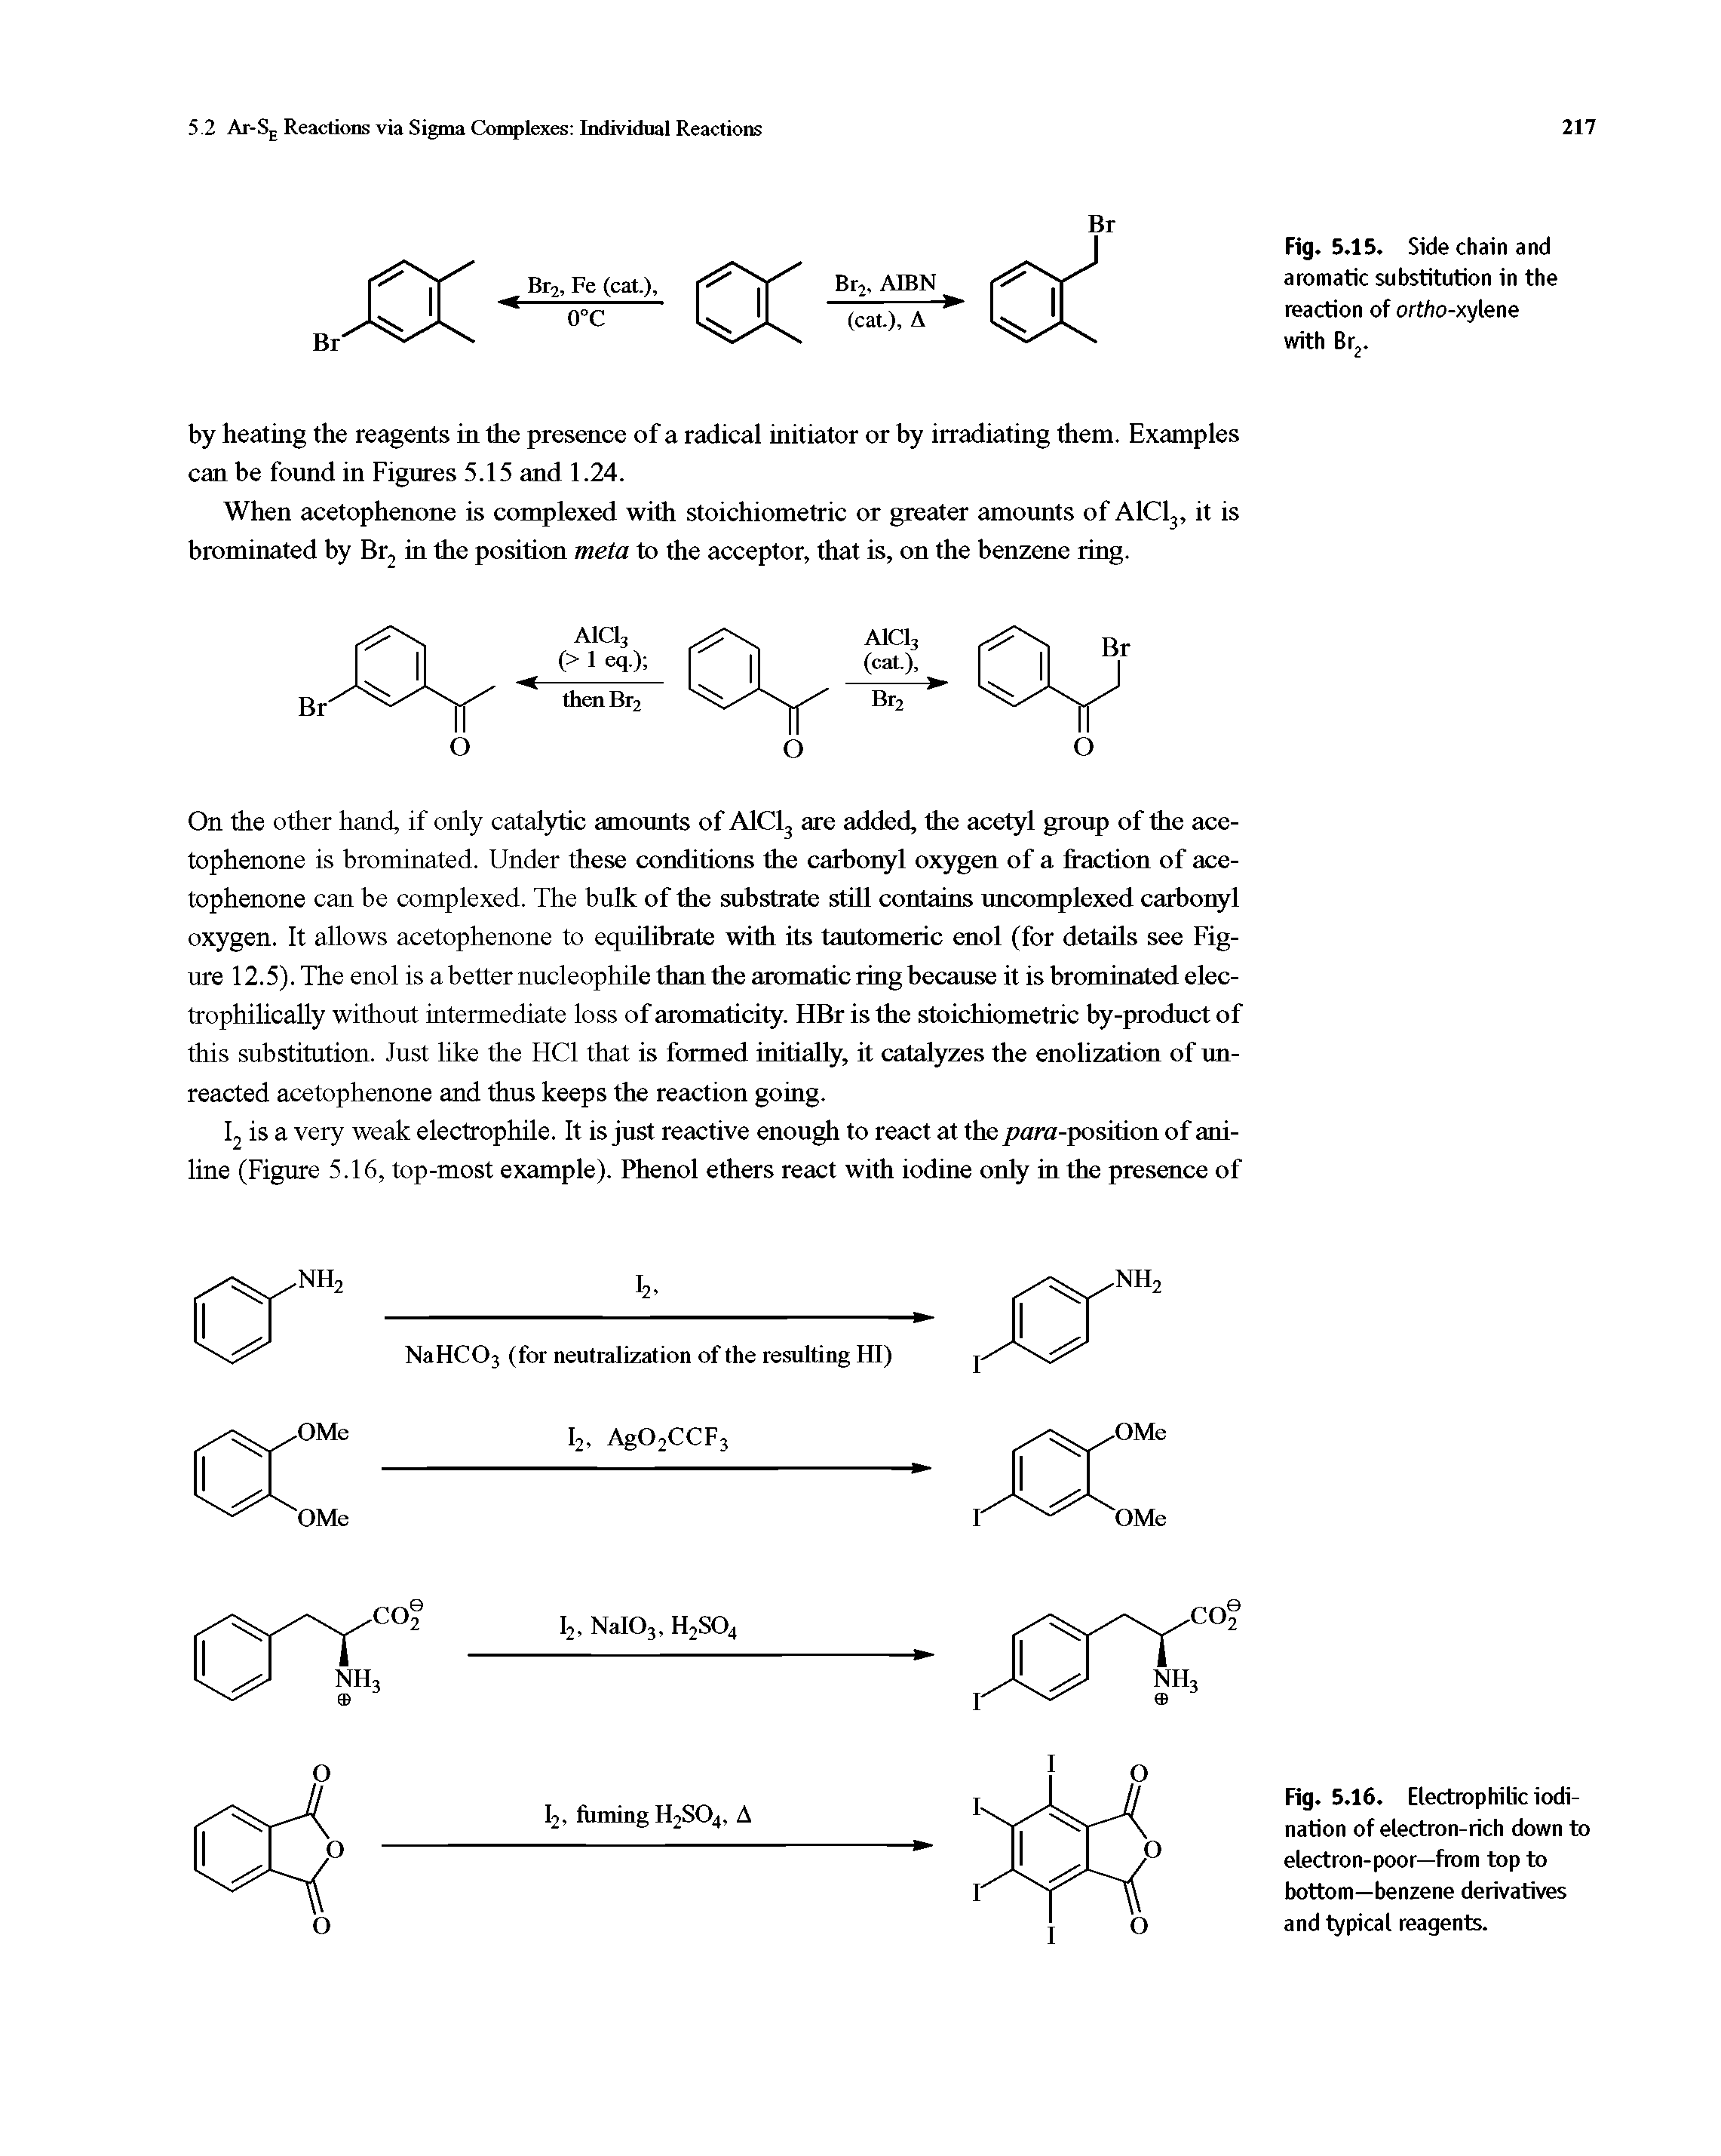 Fig. 5.16. Electrophilic iodi-nation of electron-rich down to electron-poor—from top to bottom—benzene derivatives and typical reagents.